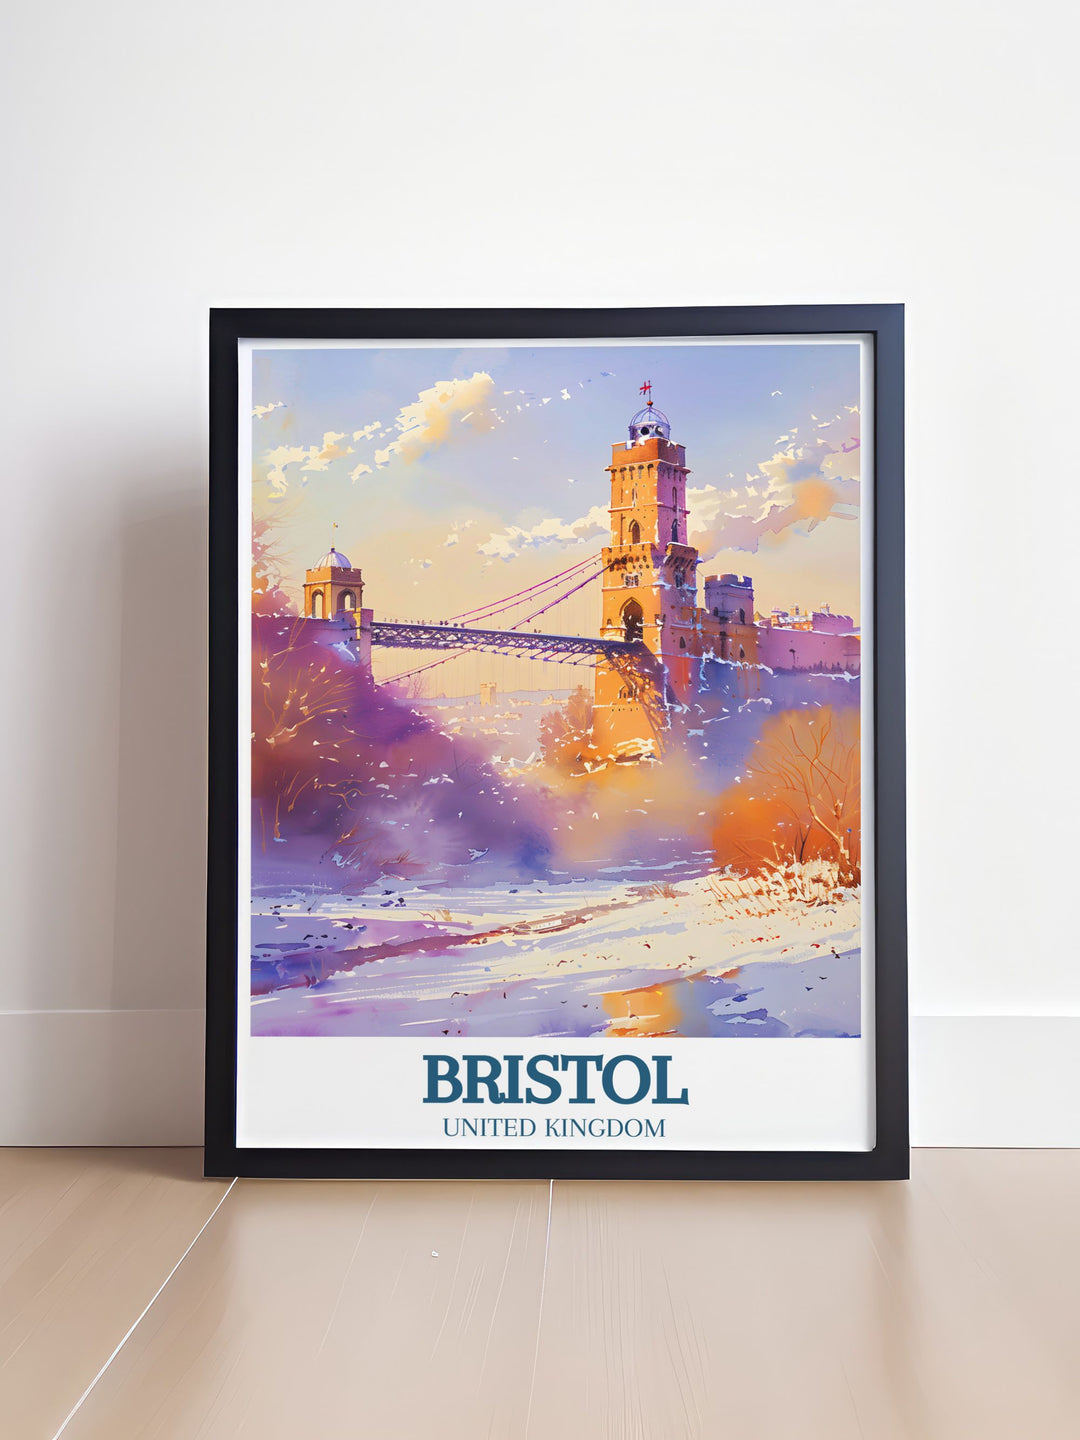 Stunning Ashton Court print capturing the essence of mountain biking. Highlights the Clifton suspension bridge River Avon, making it a beautiful addition to any wall. Ideal for those who love cycling and Bristols scenic views.